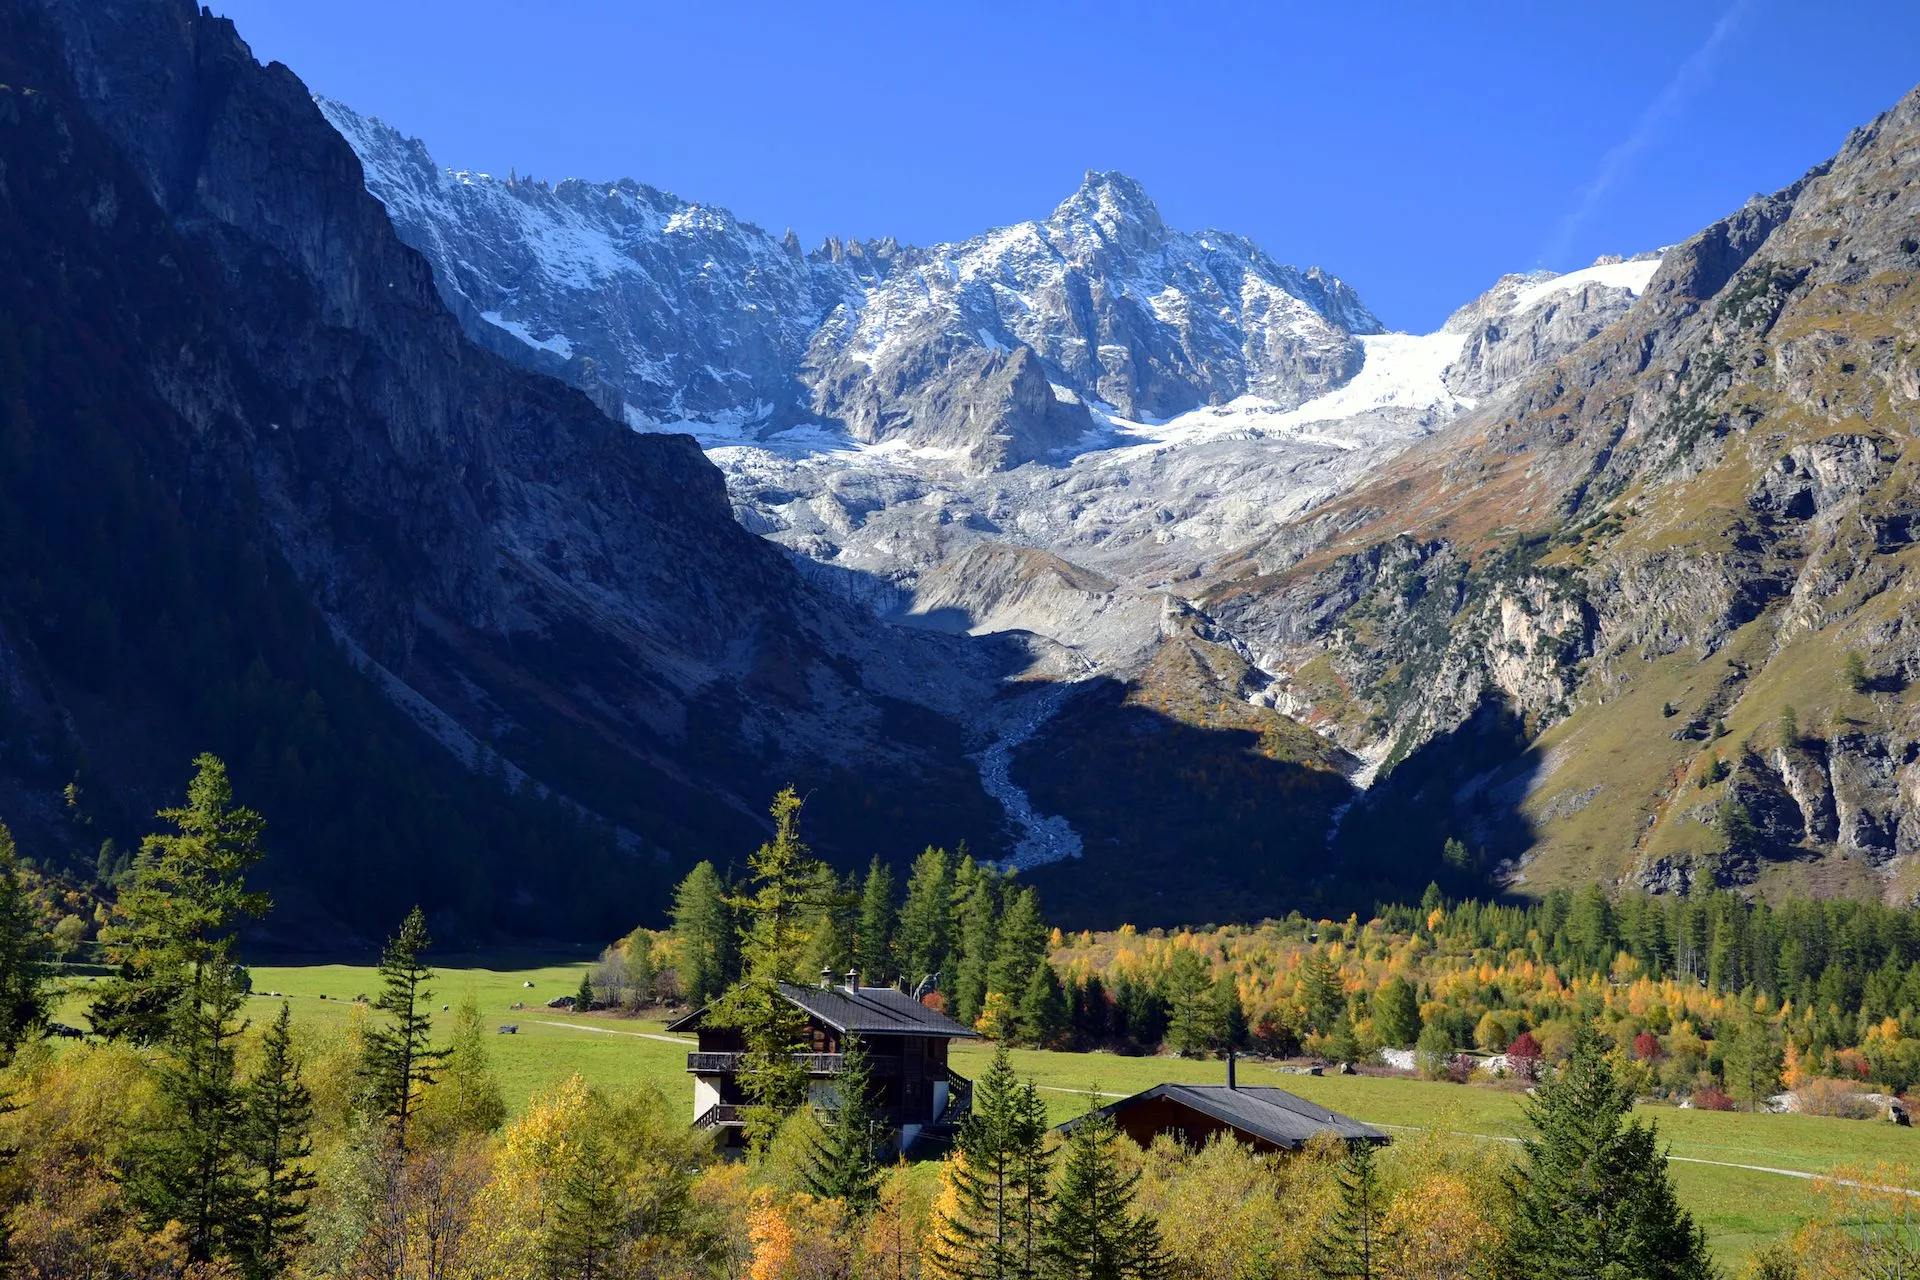 The village of La Fouly in the Val Ferret